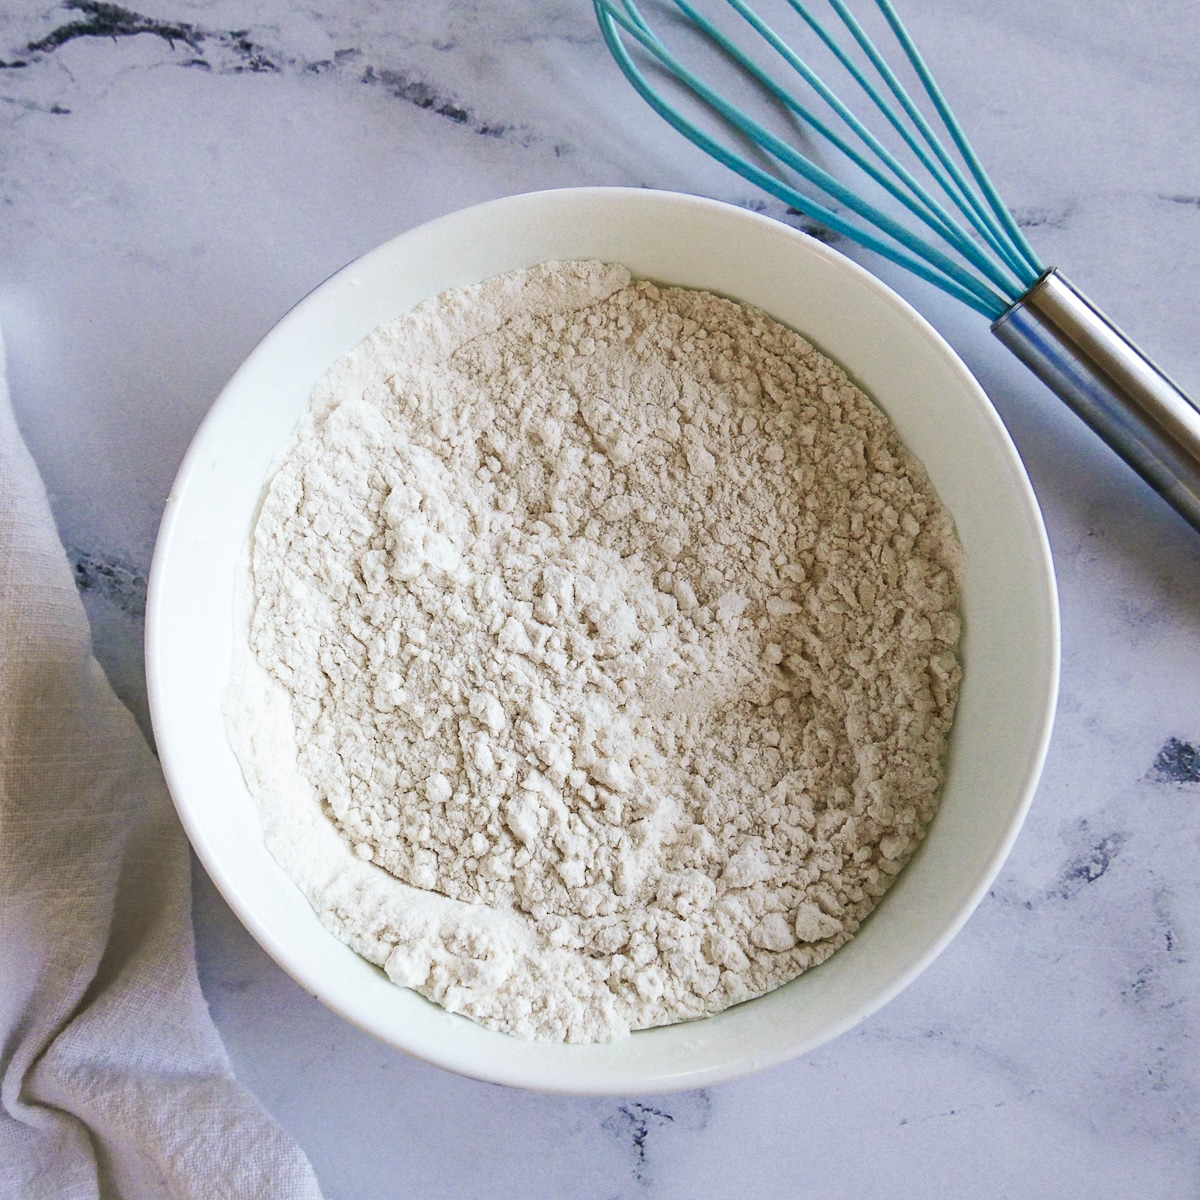 dry ingredients whisked together in a small white bowl.